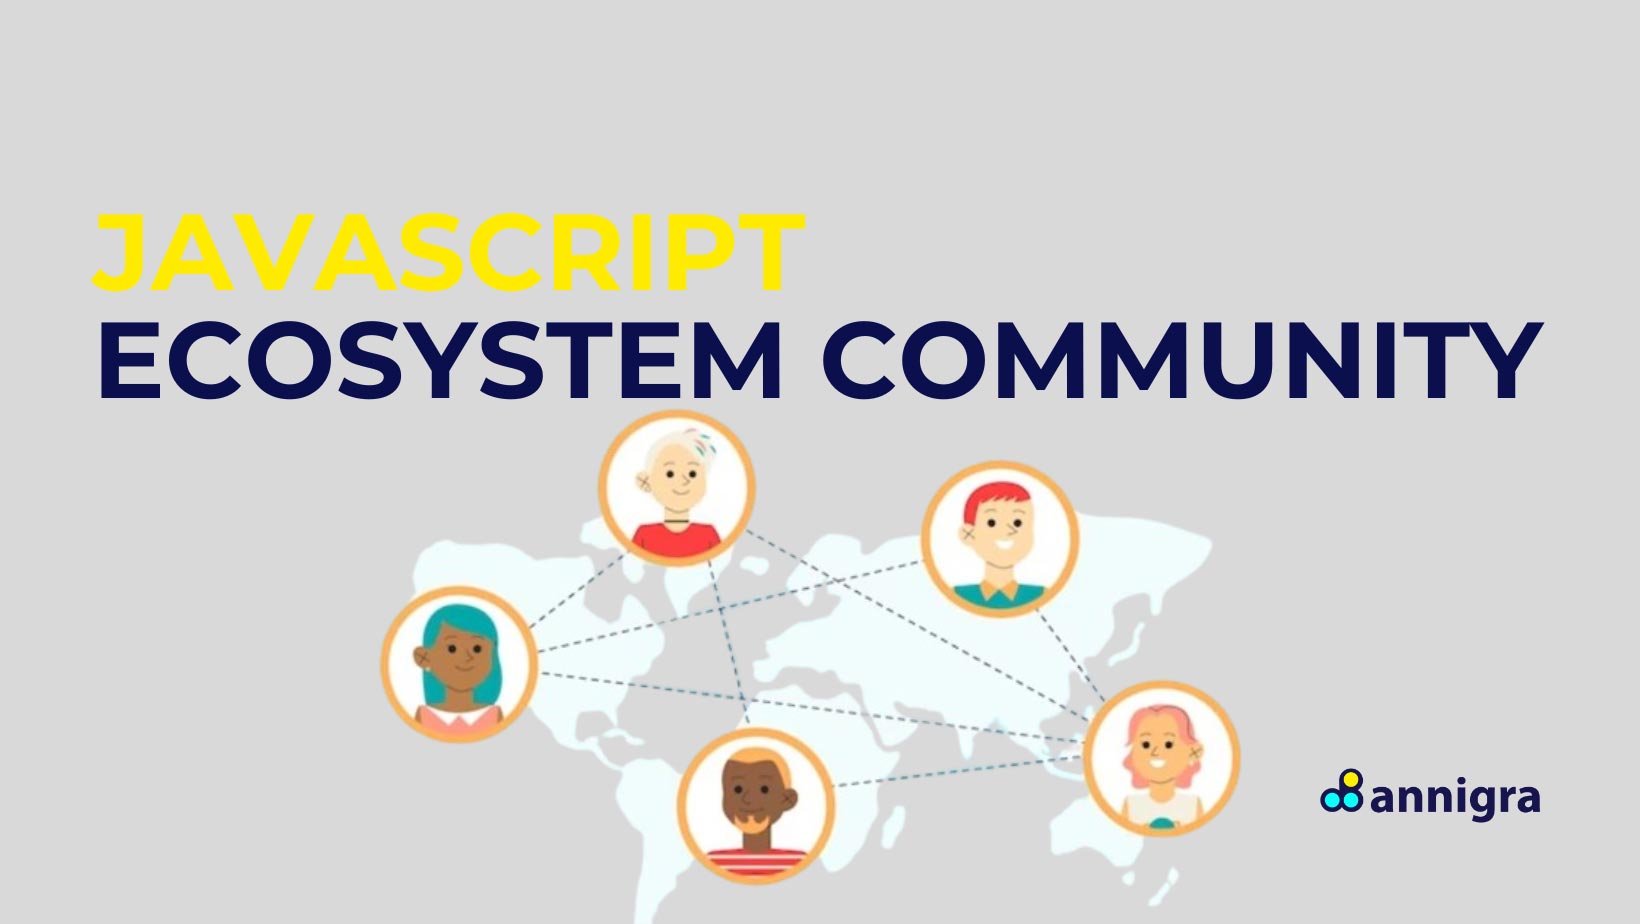 the ecosystem and community